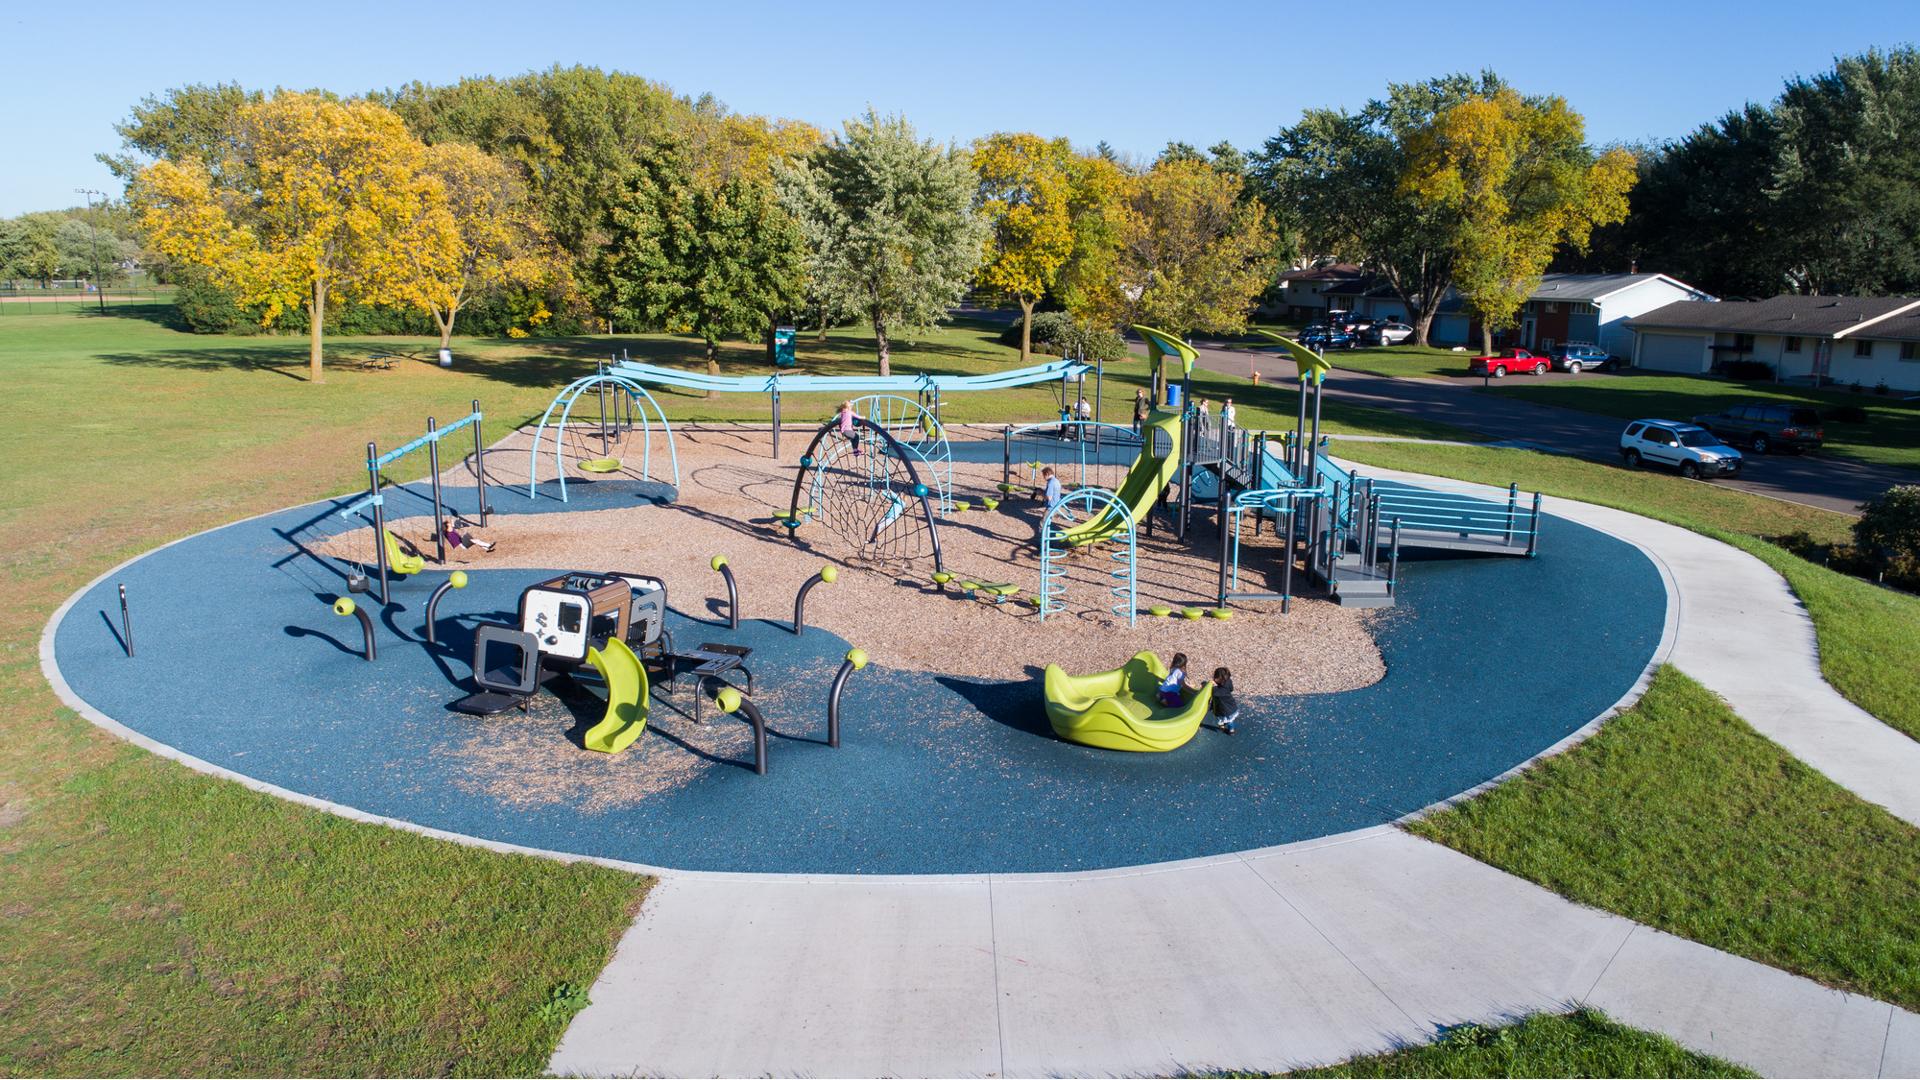 Surrounded by trees, across the street from a neighborhood. Goodrich Park features an abundance of activities for kids f all ages and abilities. The ground is a combination of sand and a manufactured surface.